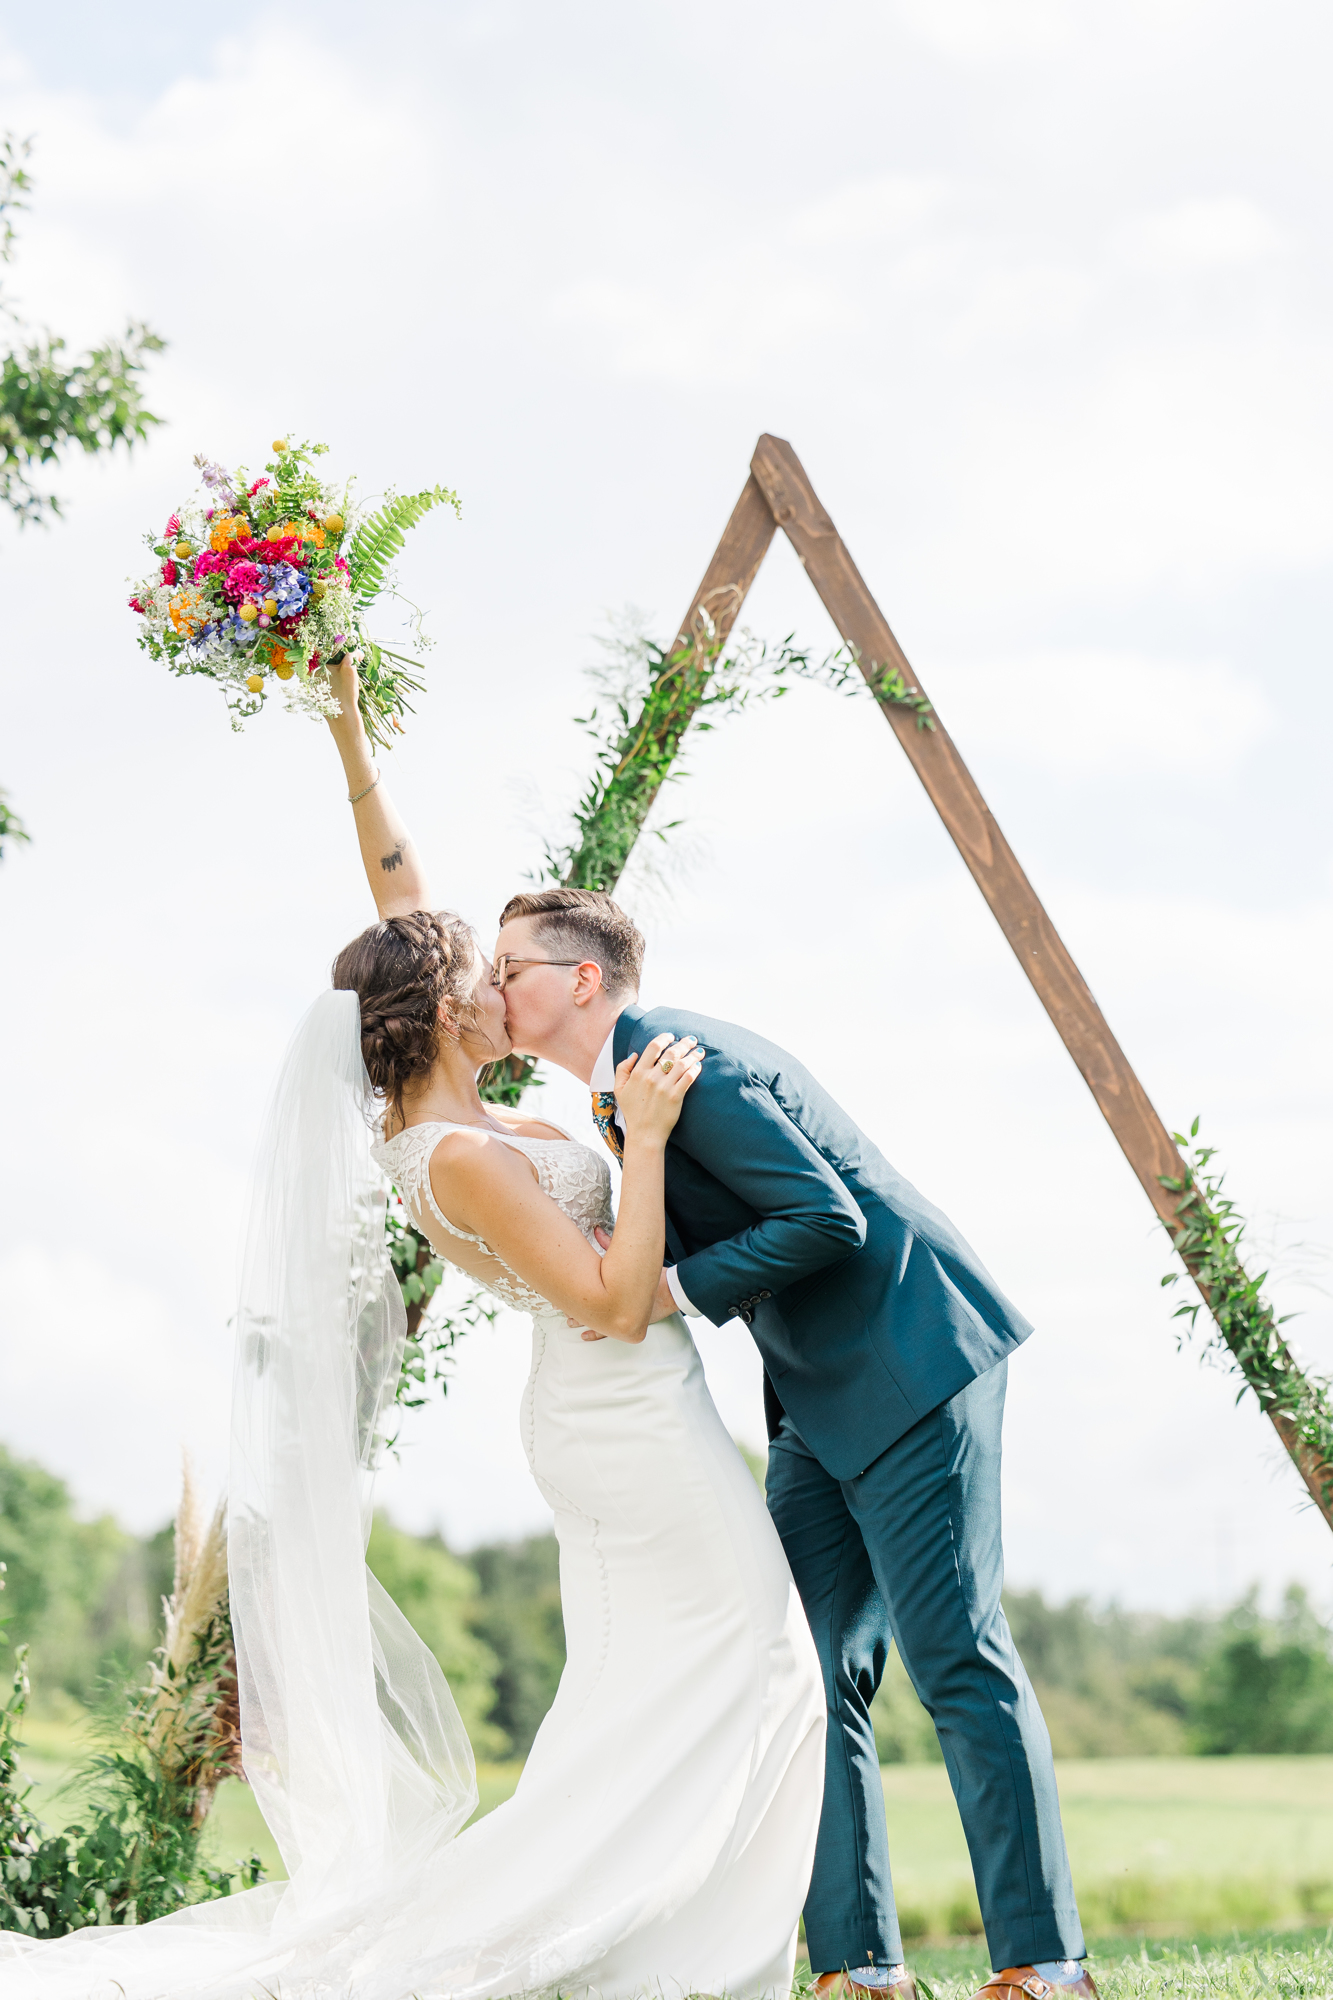 Colorful Upstate Wedding Photos at Cristman Barn in Ilion, New York